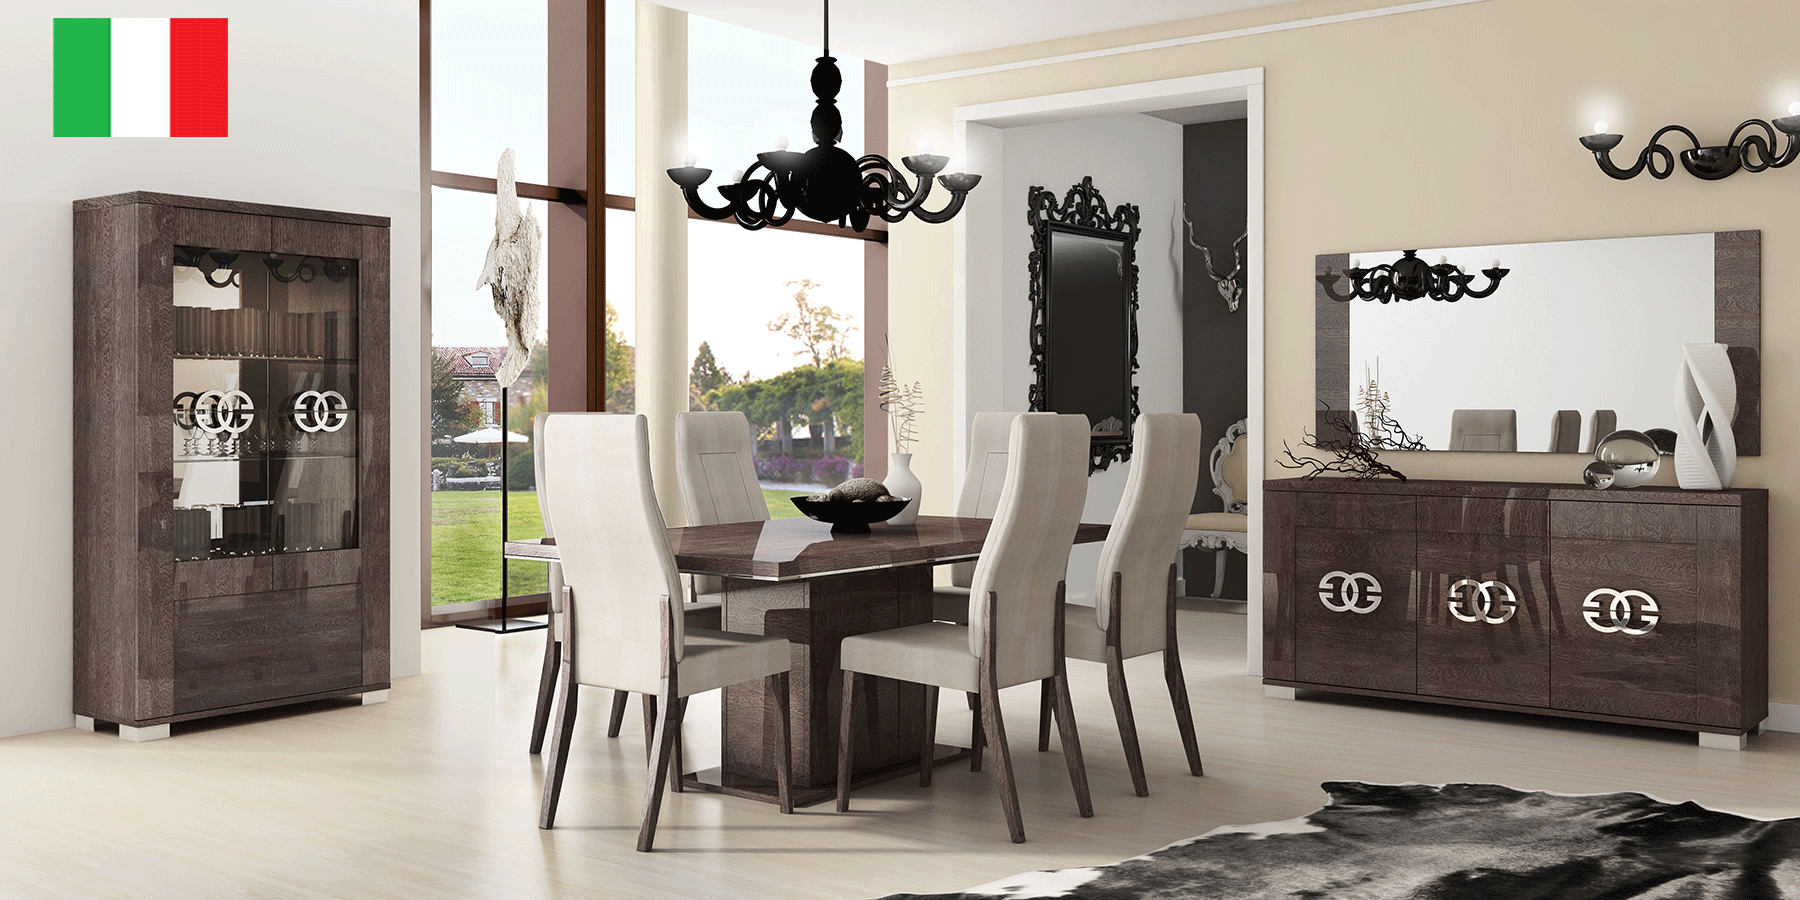 Dining Room Furniture Kitchen Tables and Chairs Sets Prestige Dining Room